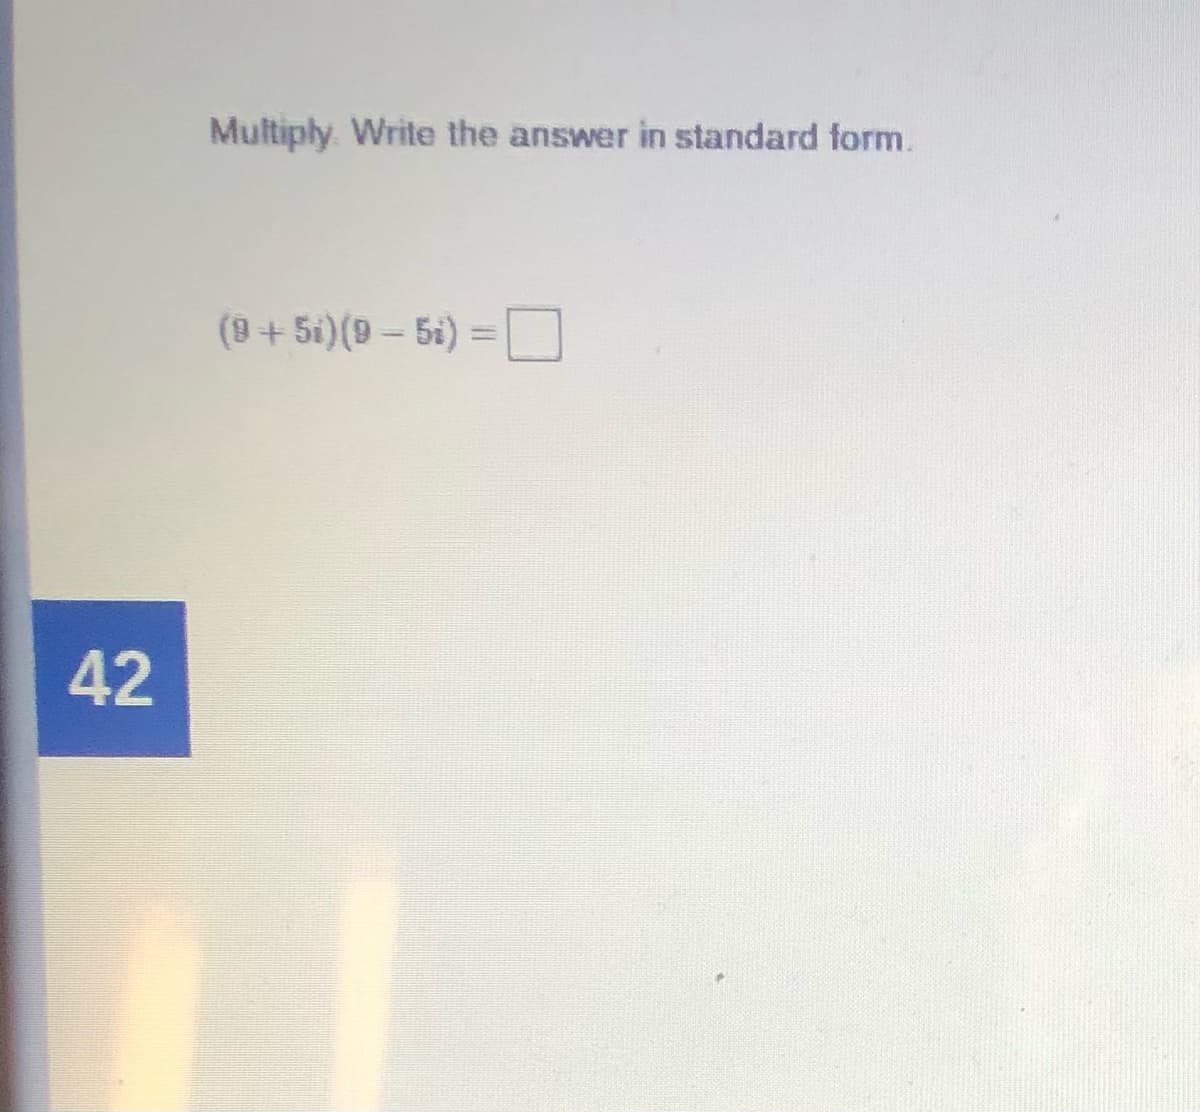 Multiply. Write the answer in standard form.
(++ 5i) (9- 5i) =O
%3D
42
